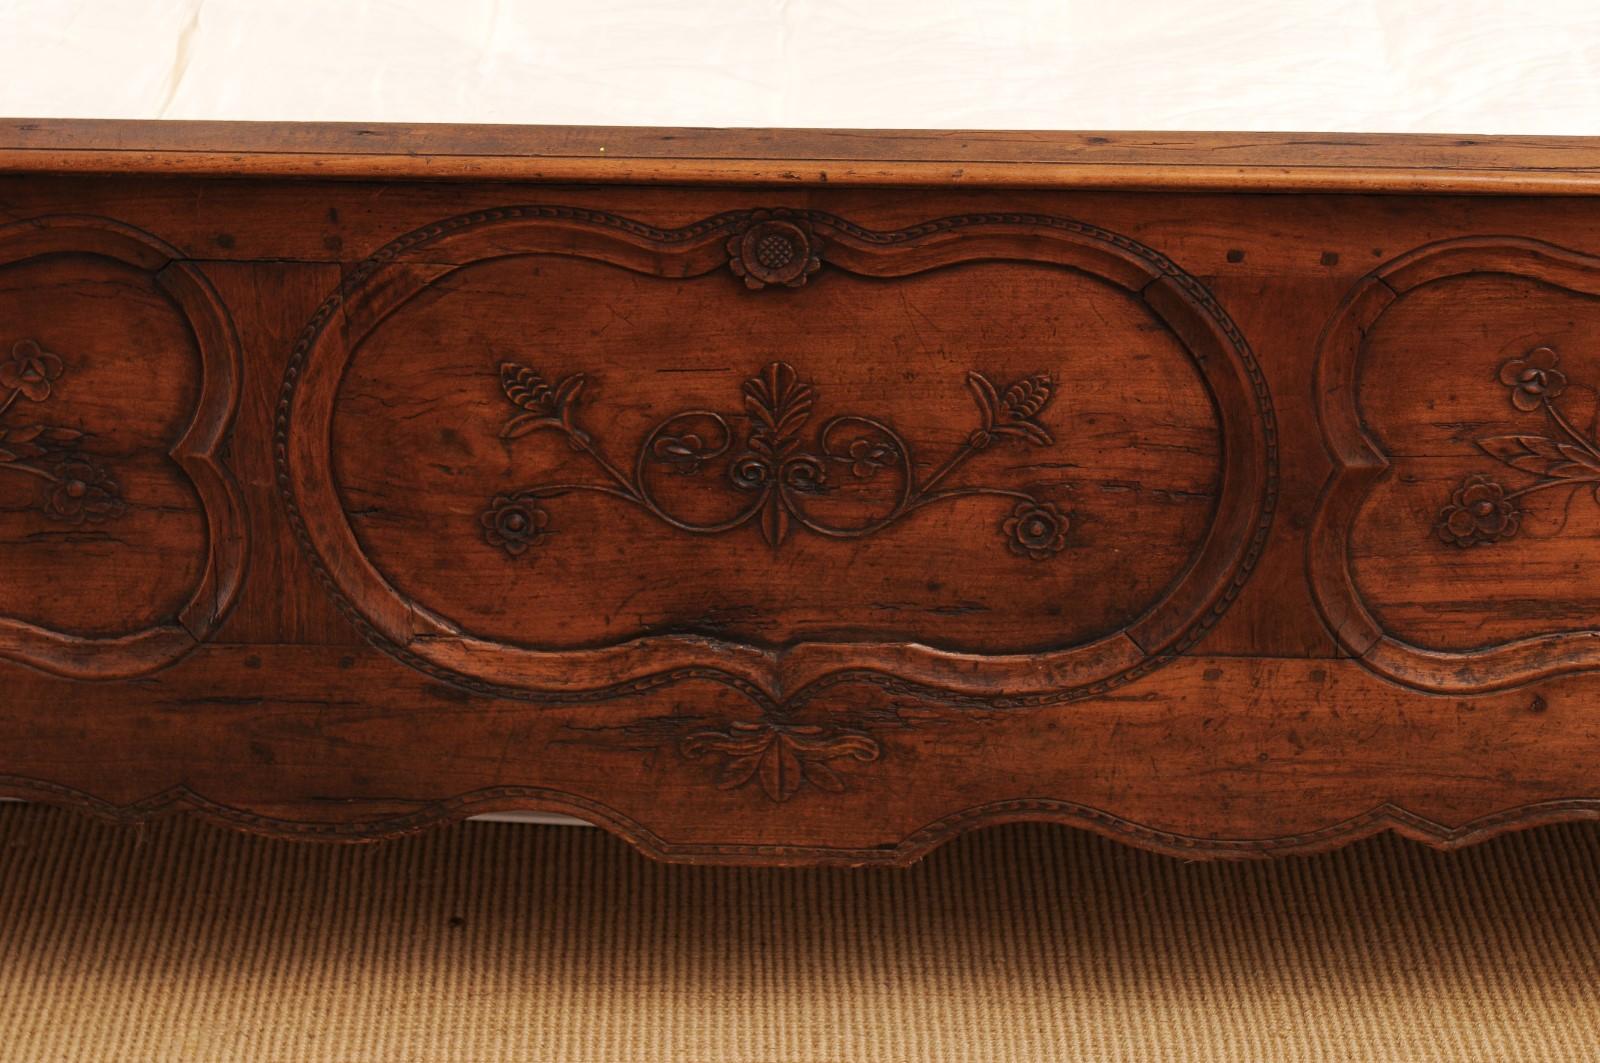 French 1870s Napoléon III Period Walnut Bed with Low-Relief Carved Floral Décor 12